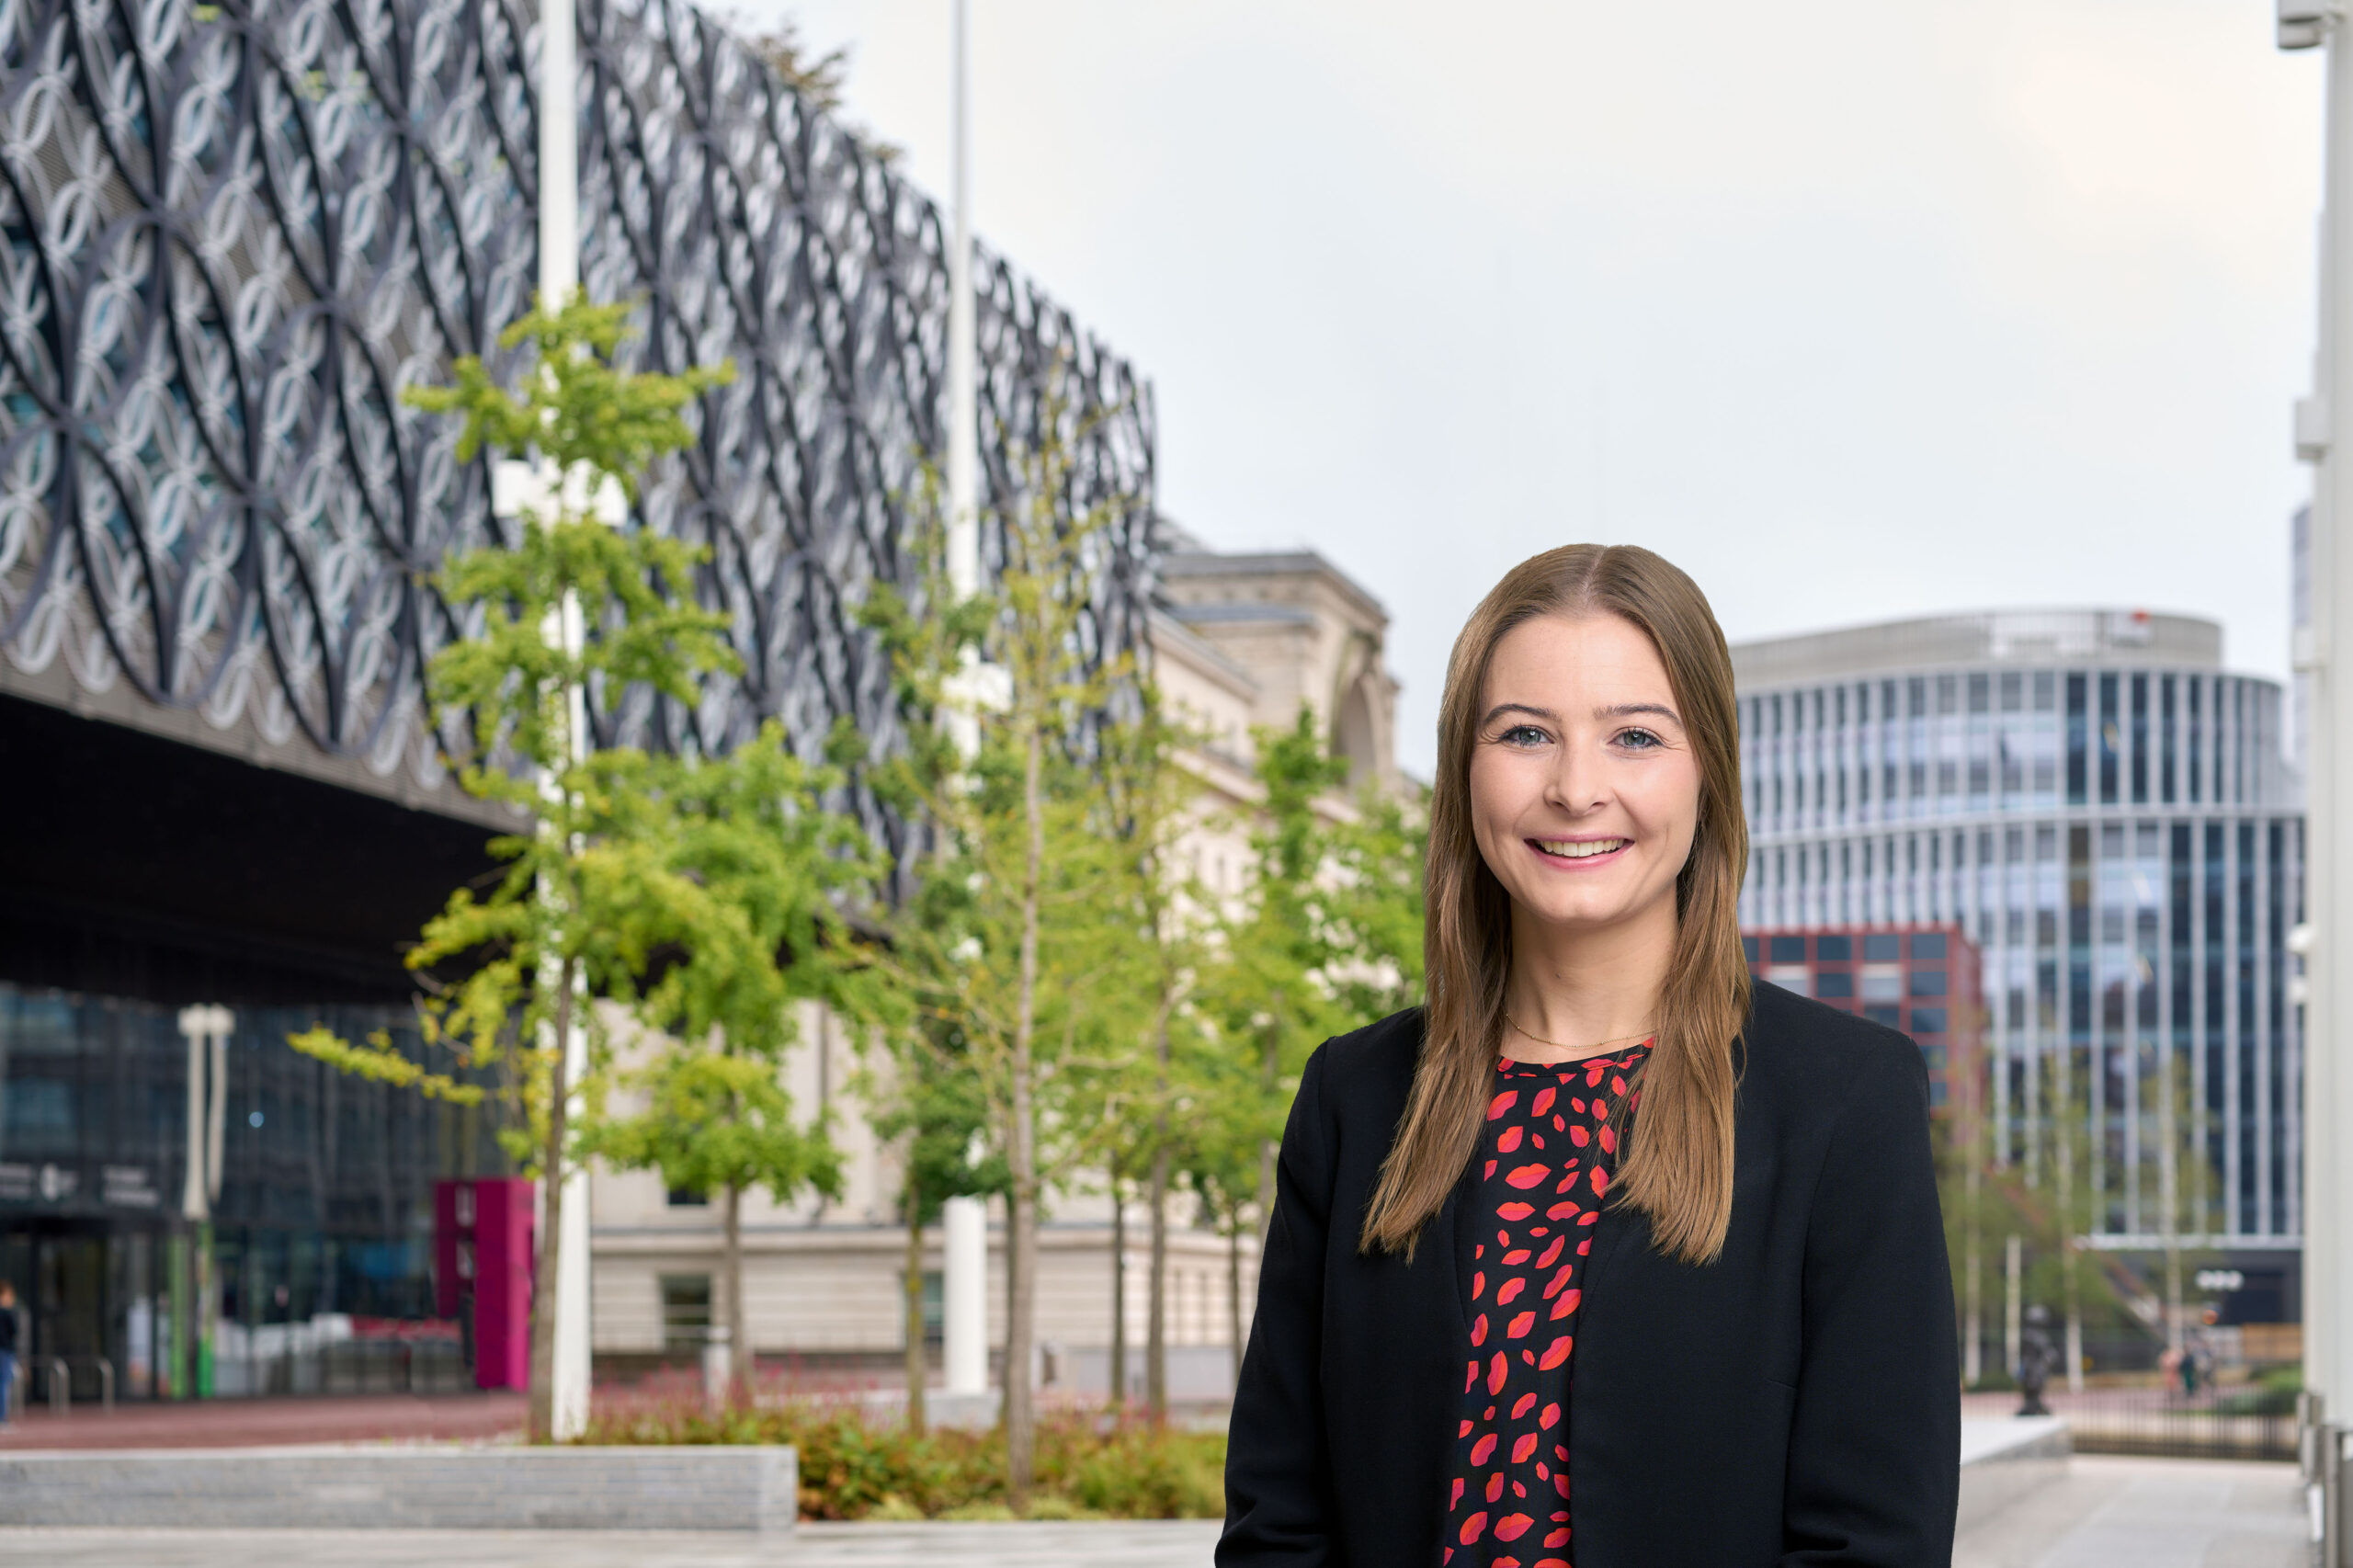 A woman in a red and black blouse and black blazer is standing and smiling in front of some trees and buildings in central Birmingham.